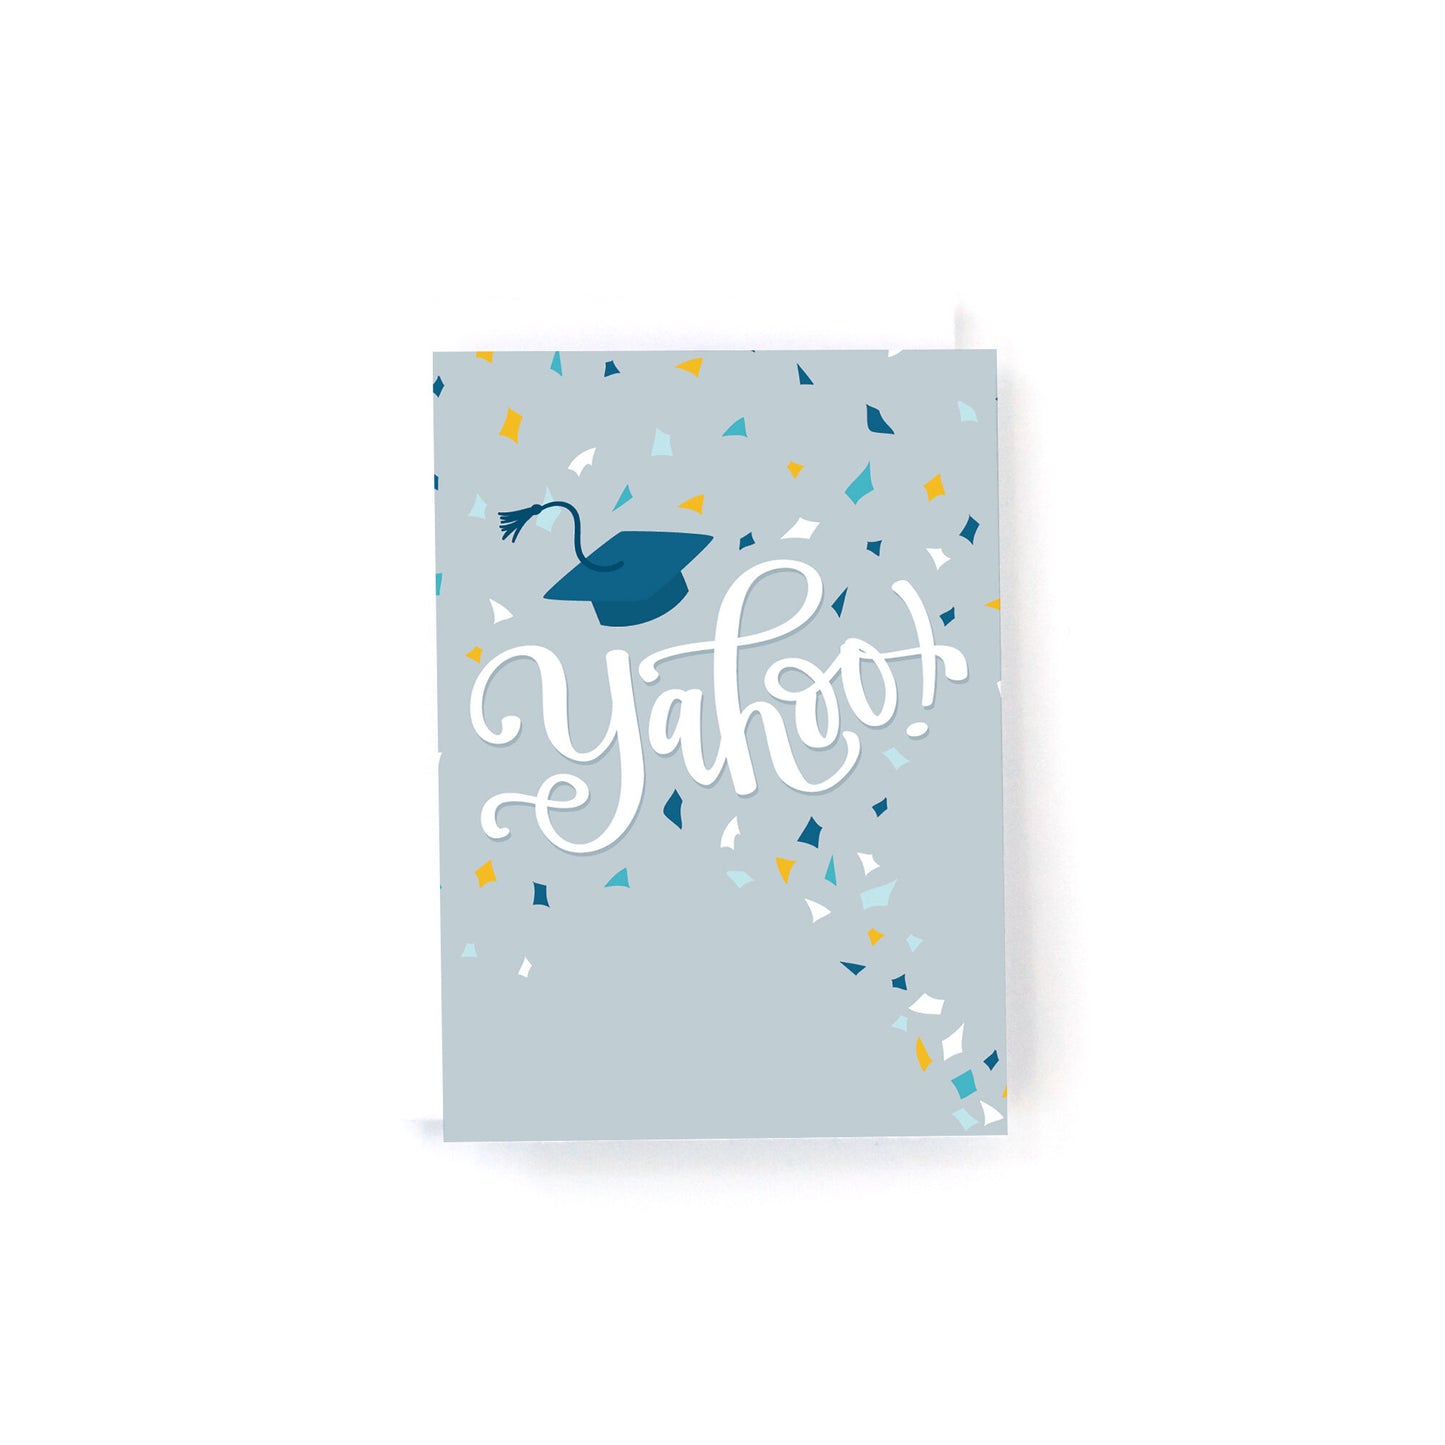 mini graduation card with a grad cap being tossed in the air with lots of confetti and the text, Yahoo! on a blur background.